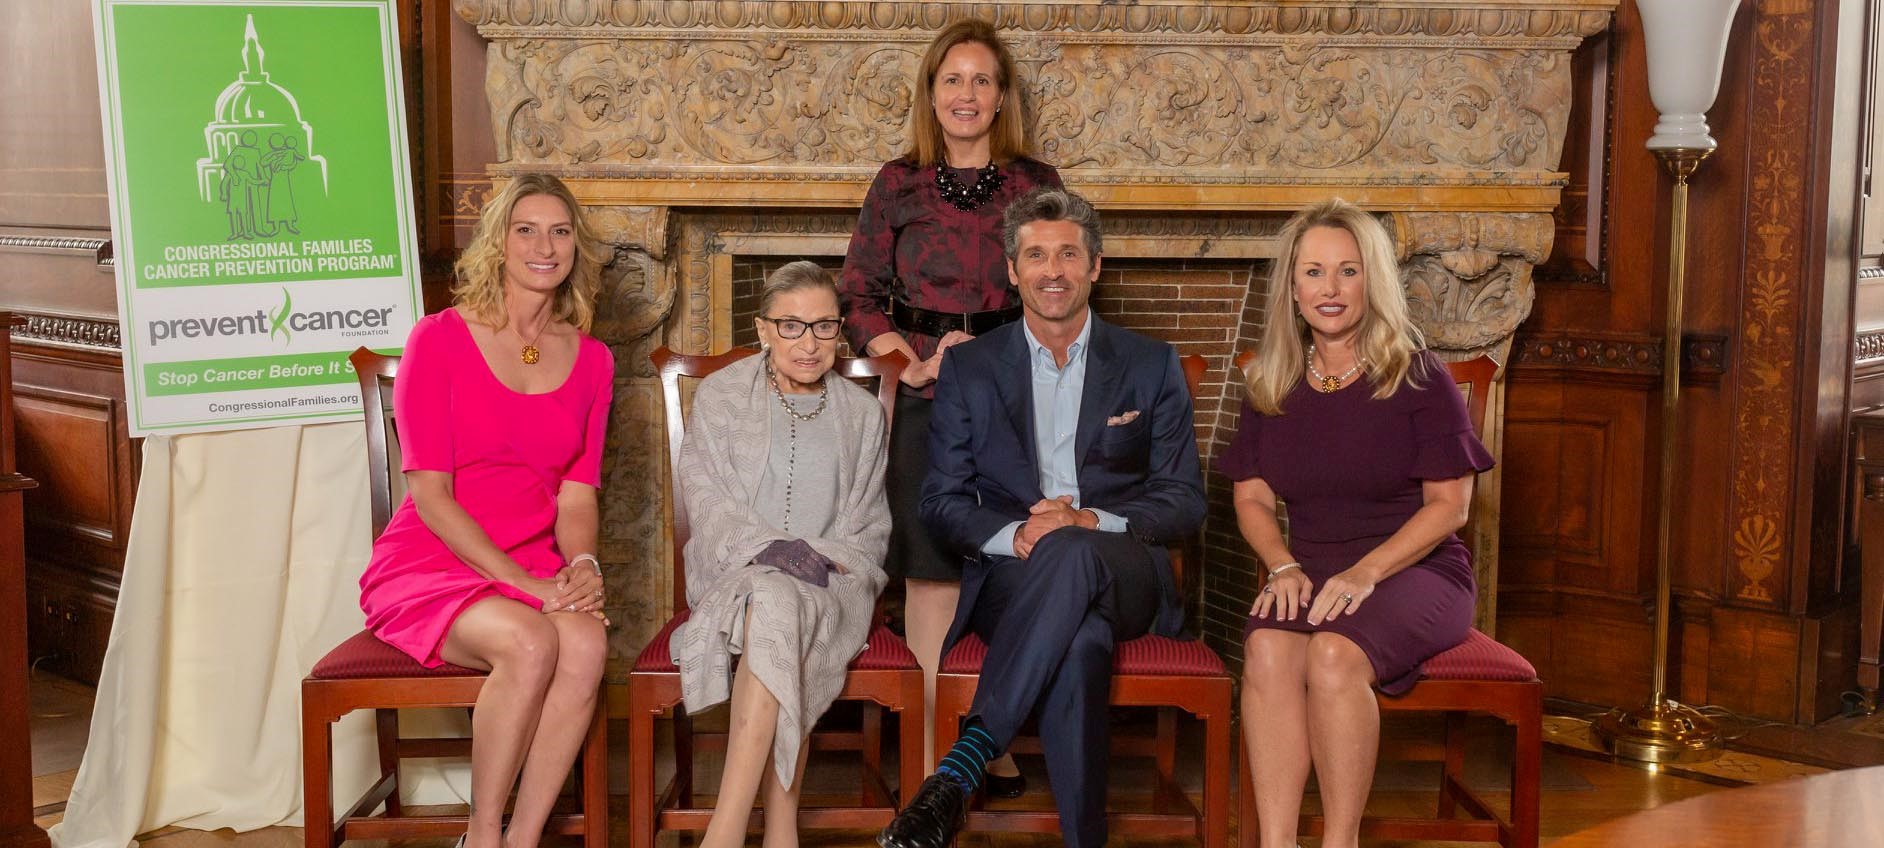 27th Annual Congressional Families Luncheon honors Ruth Bader Ginsburg, Patrick Dempsey, Amanda Soto and LeeAnn Johnson